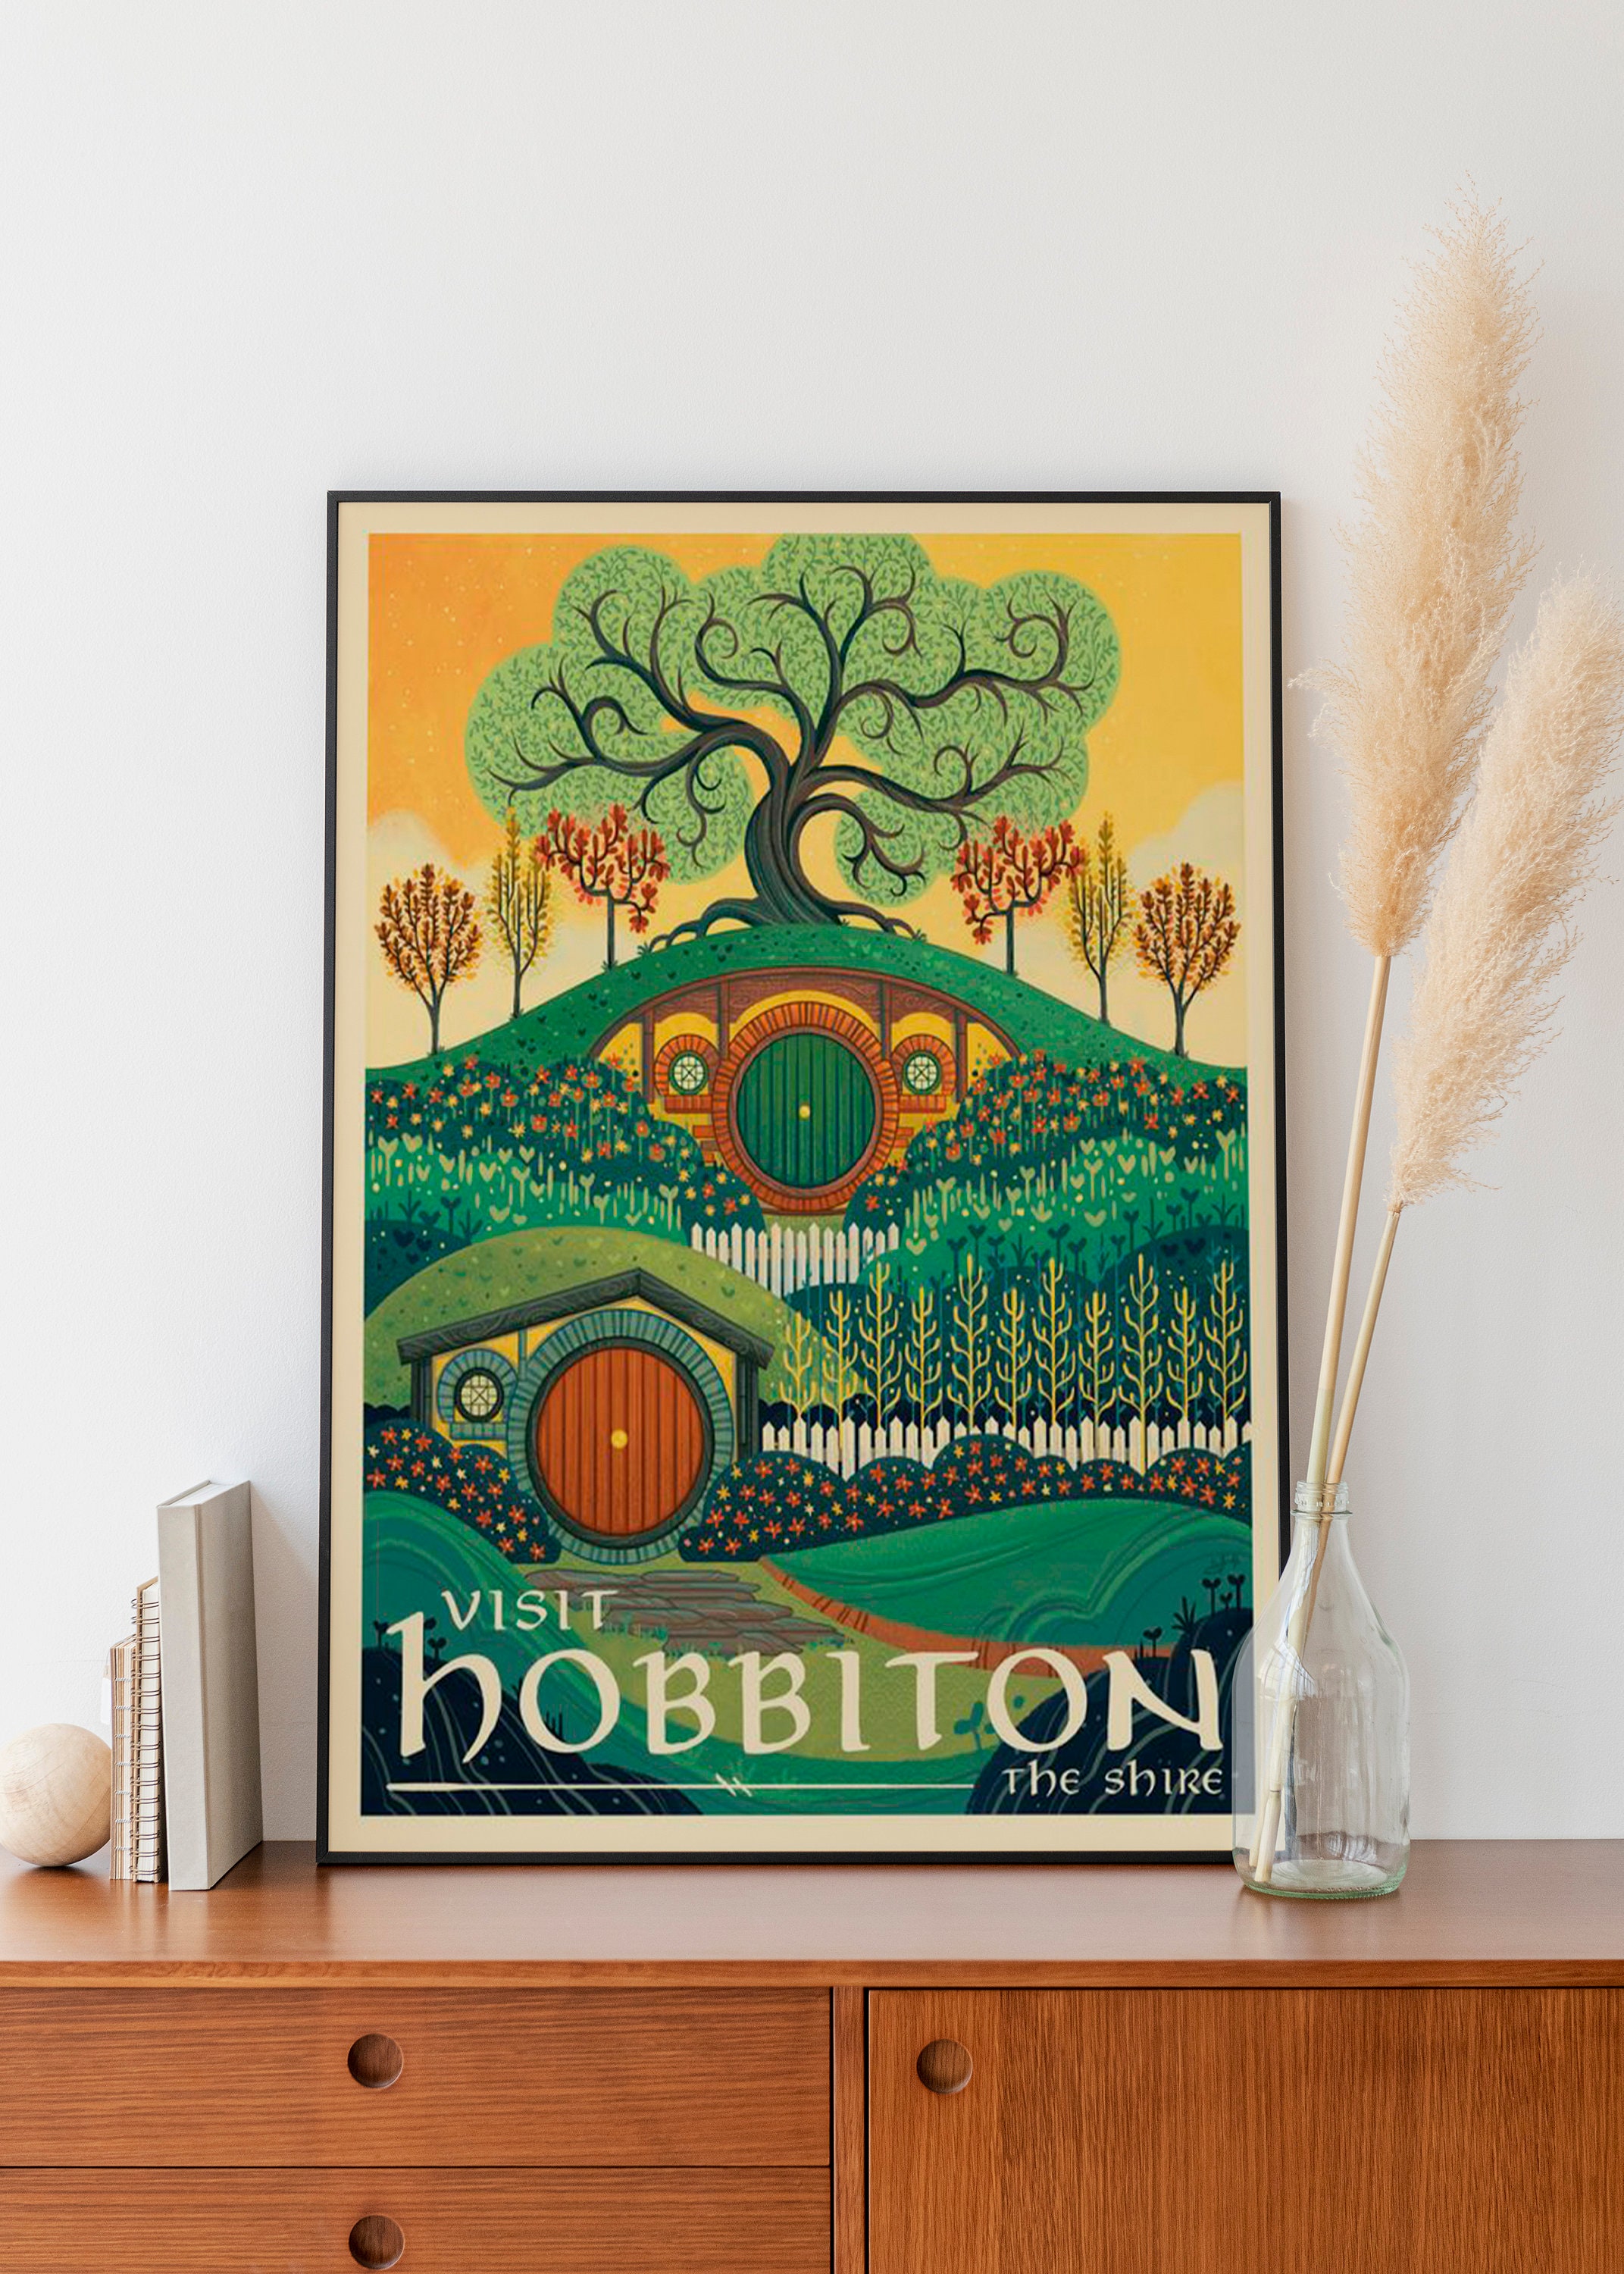 Lord of the Poster | OFF 42175960 50% Art Graber by SKU Hobbiton | Rings Printerval Gillian sold